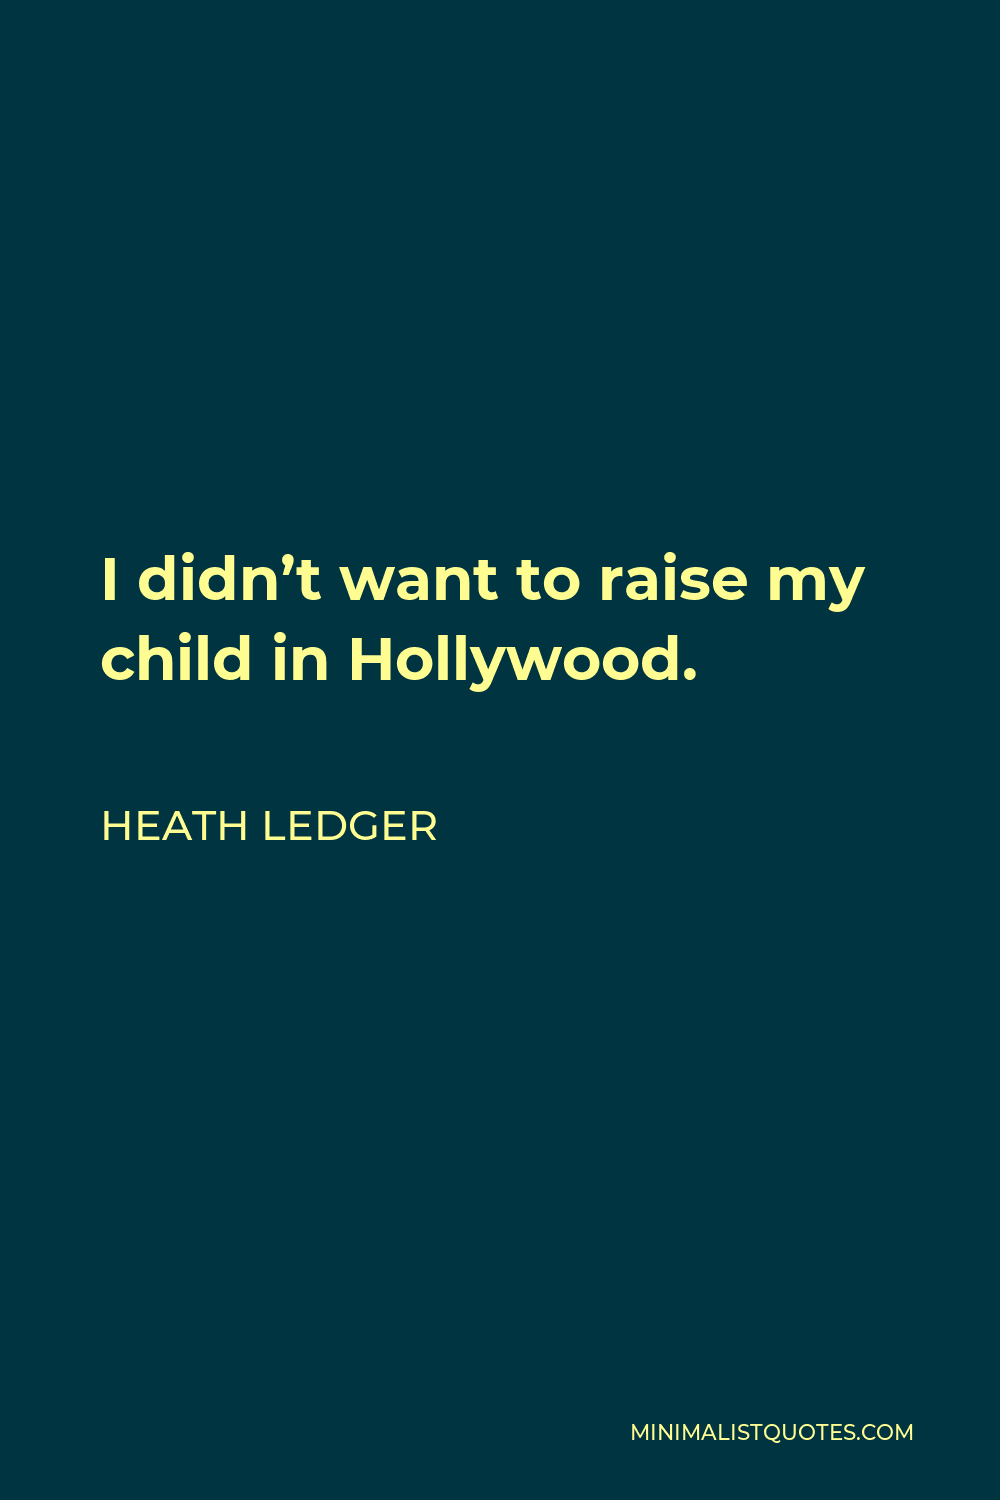 Heath Ledger Quote - I didn’t want to raise my child in Hollywood.